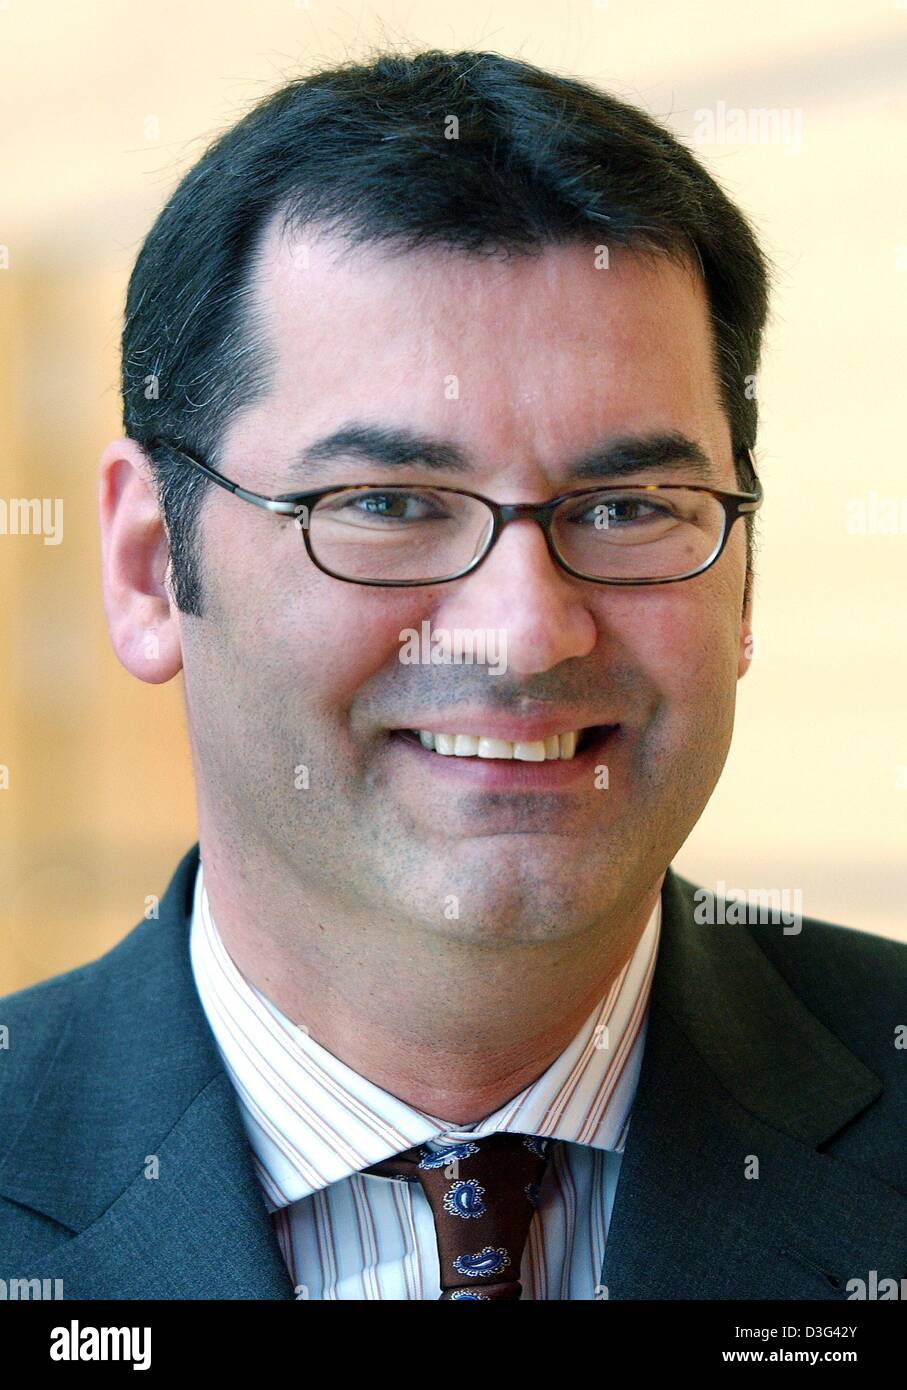 (dpa) - Gerhard Pegam, CEO of the Epcos electronics company, is photographed ahead of the general meeting in Munich, 12 February 2003. Epcos produces mainly electronic parts and passive components for technical applications.  Epcos was founded as a joint venture by Siemens and Matsushita in 1989. Stock Photo